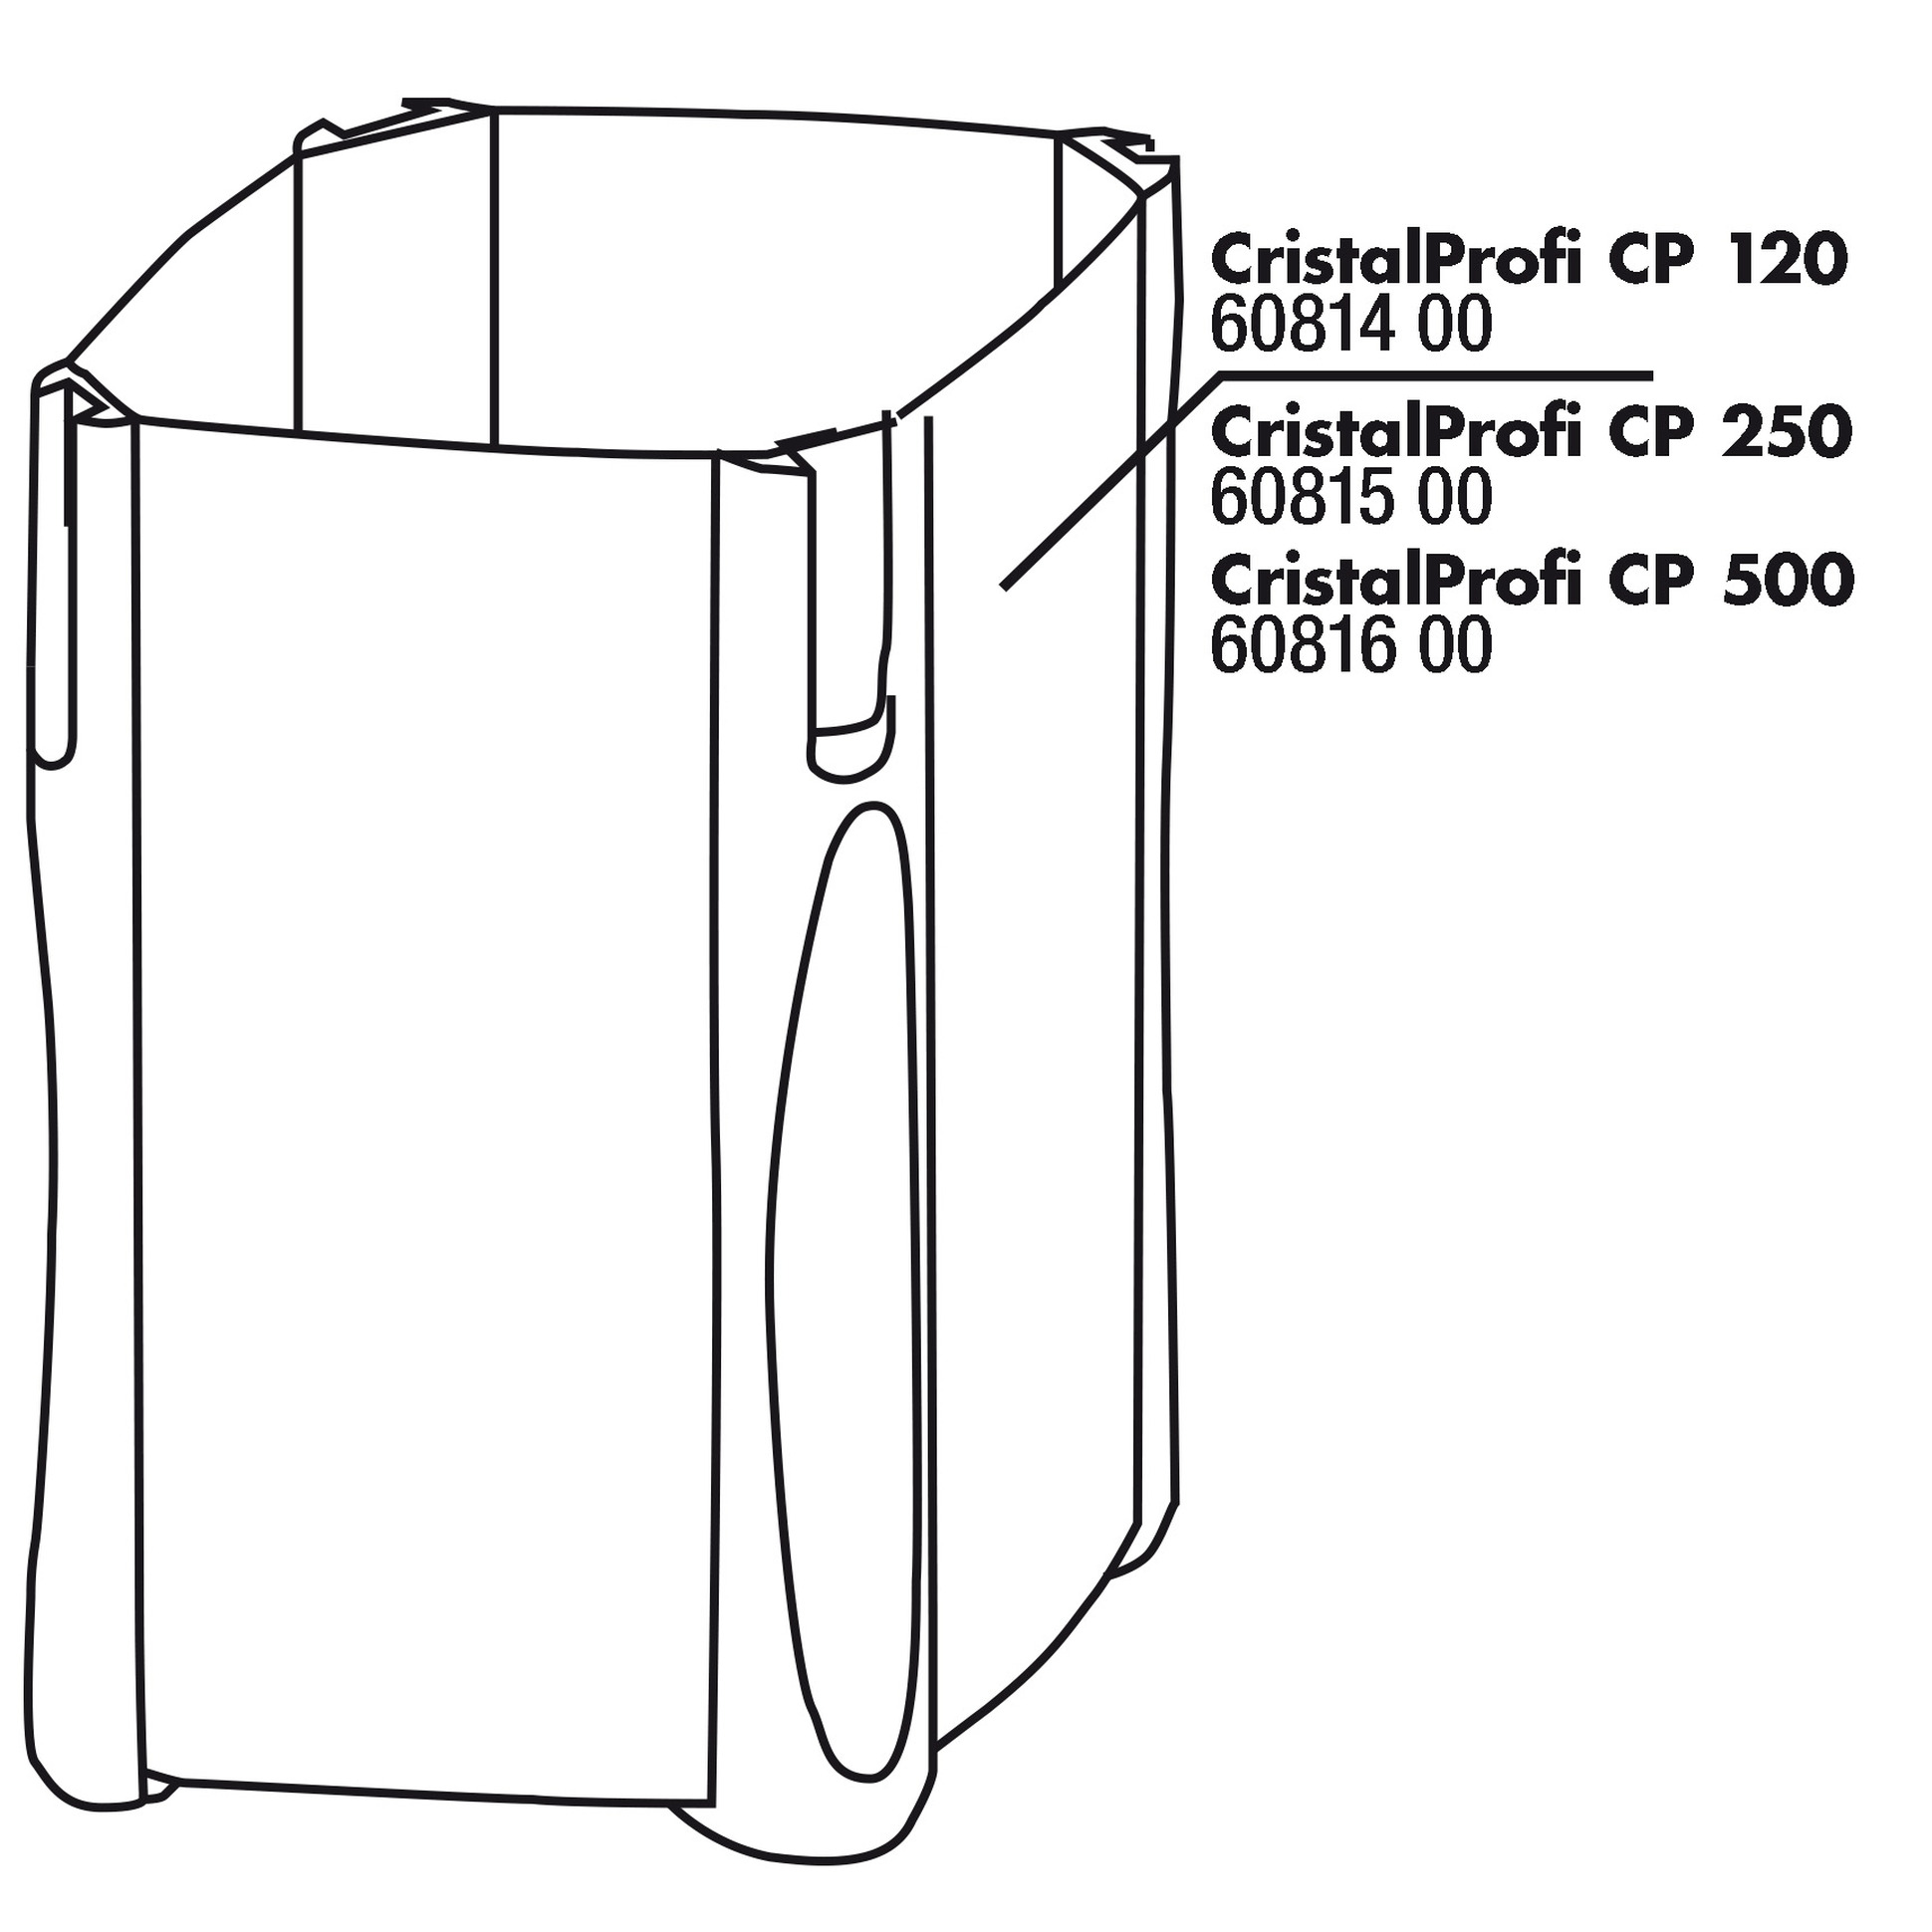 JBL CP filter canister